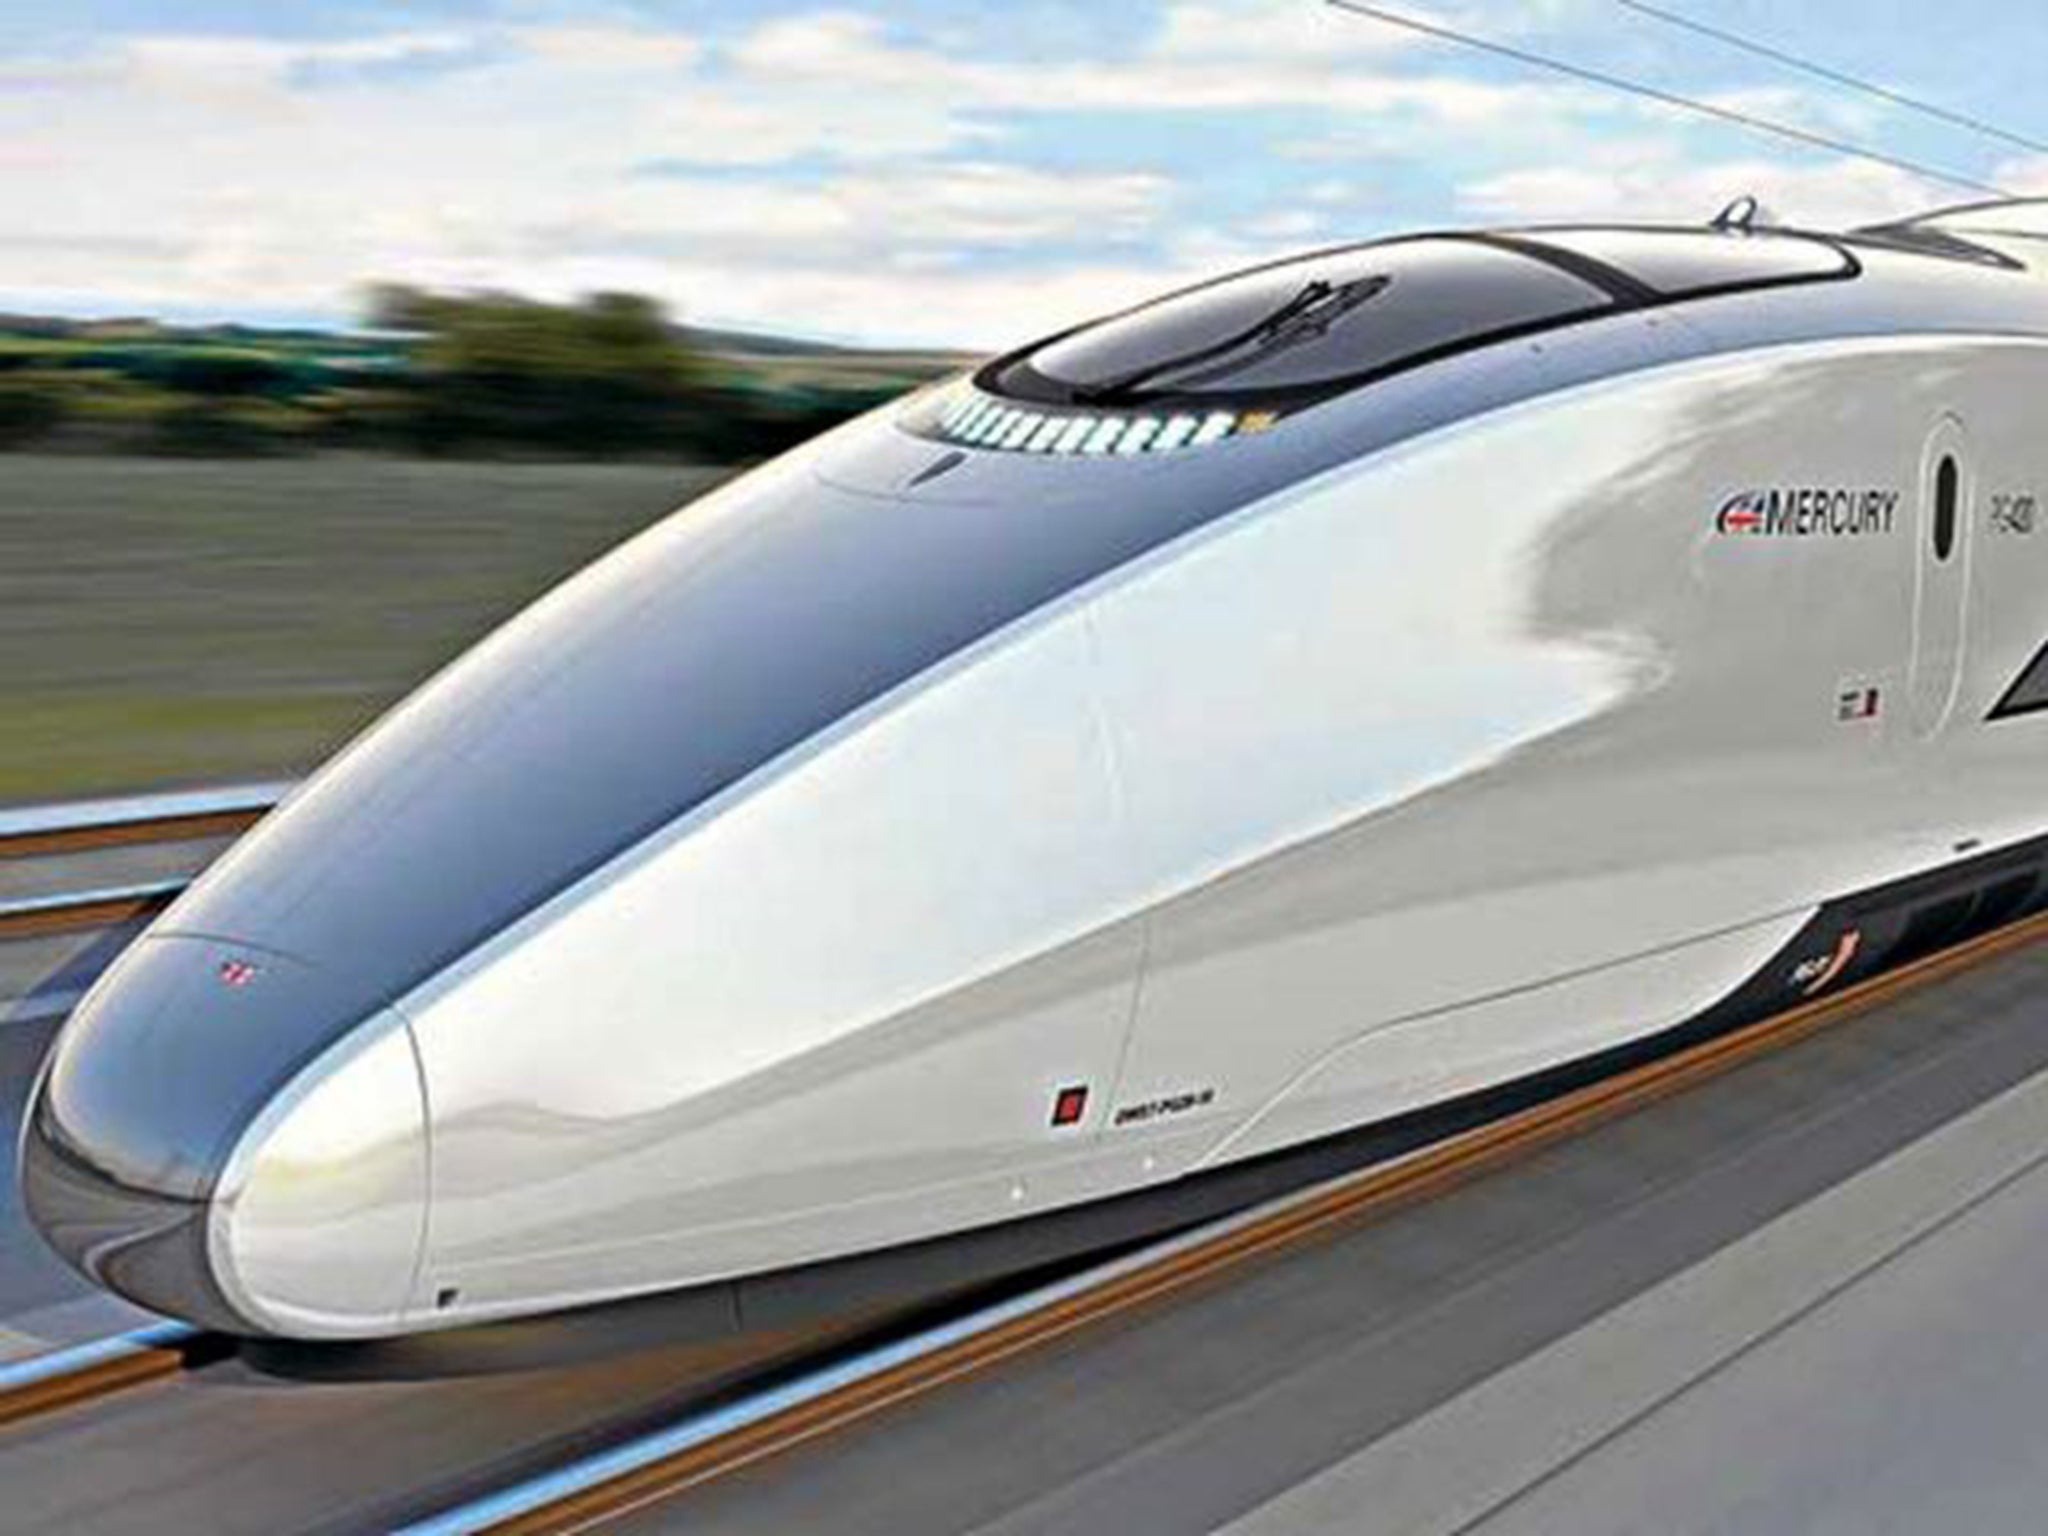 An artist’s impression of an HS2 train, due to start running in 2026